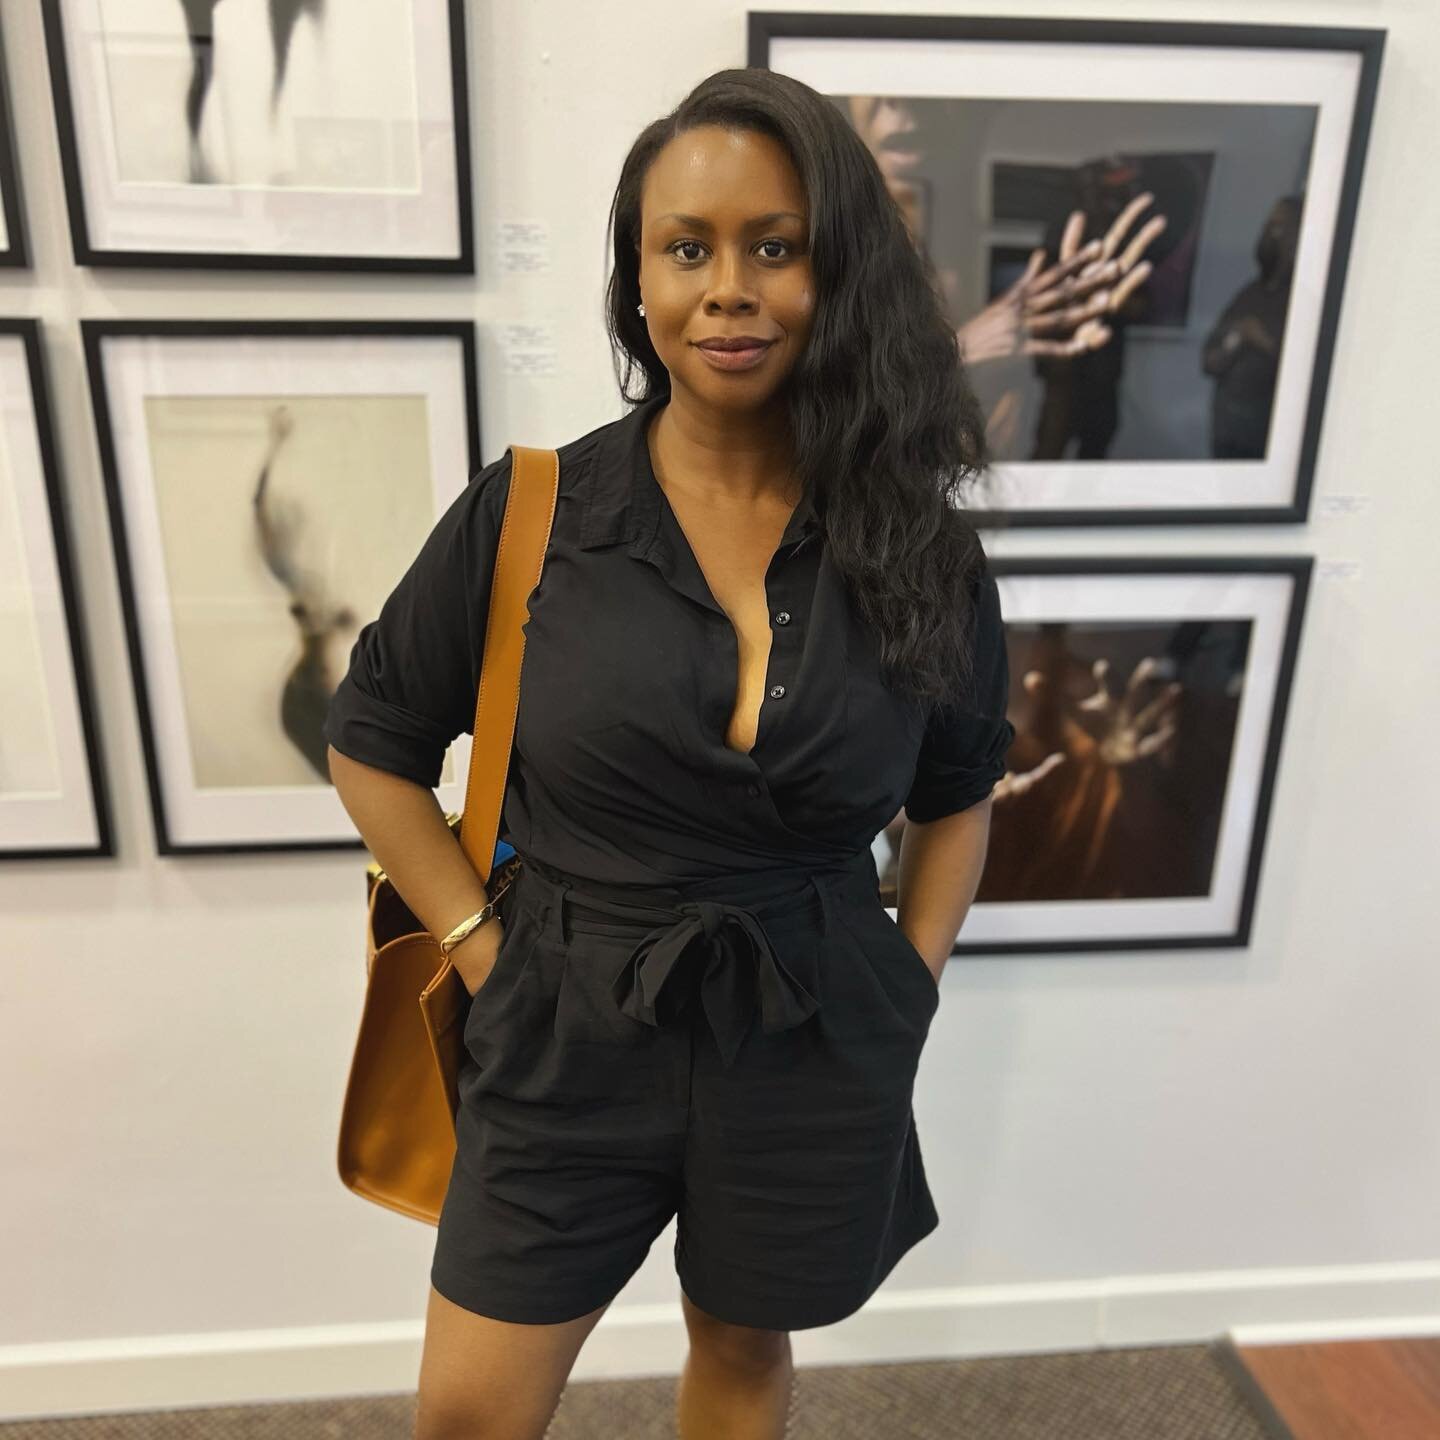 Really enjoyed opening night of &ldquo;The Eyes on Atlanta: Black Contemporary Photography&rdquo; and am grateful to have my work included and to share this space with some of Atlanta&rsquo;s most talented artist and photographers. Thank you @darnell